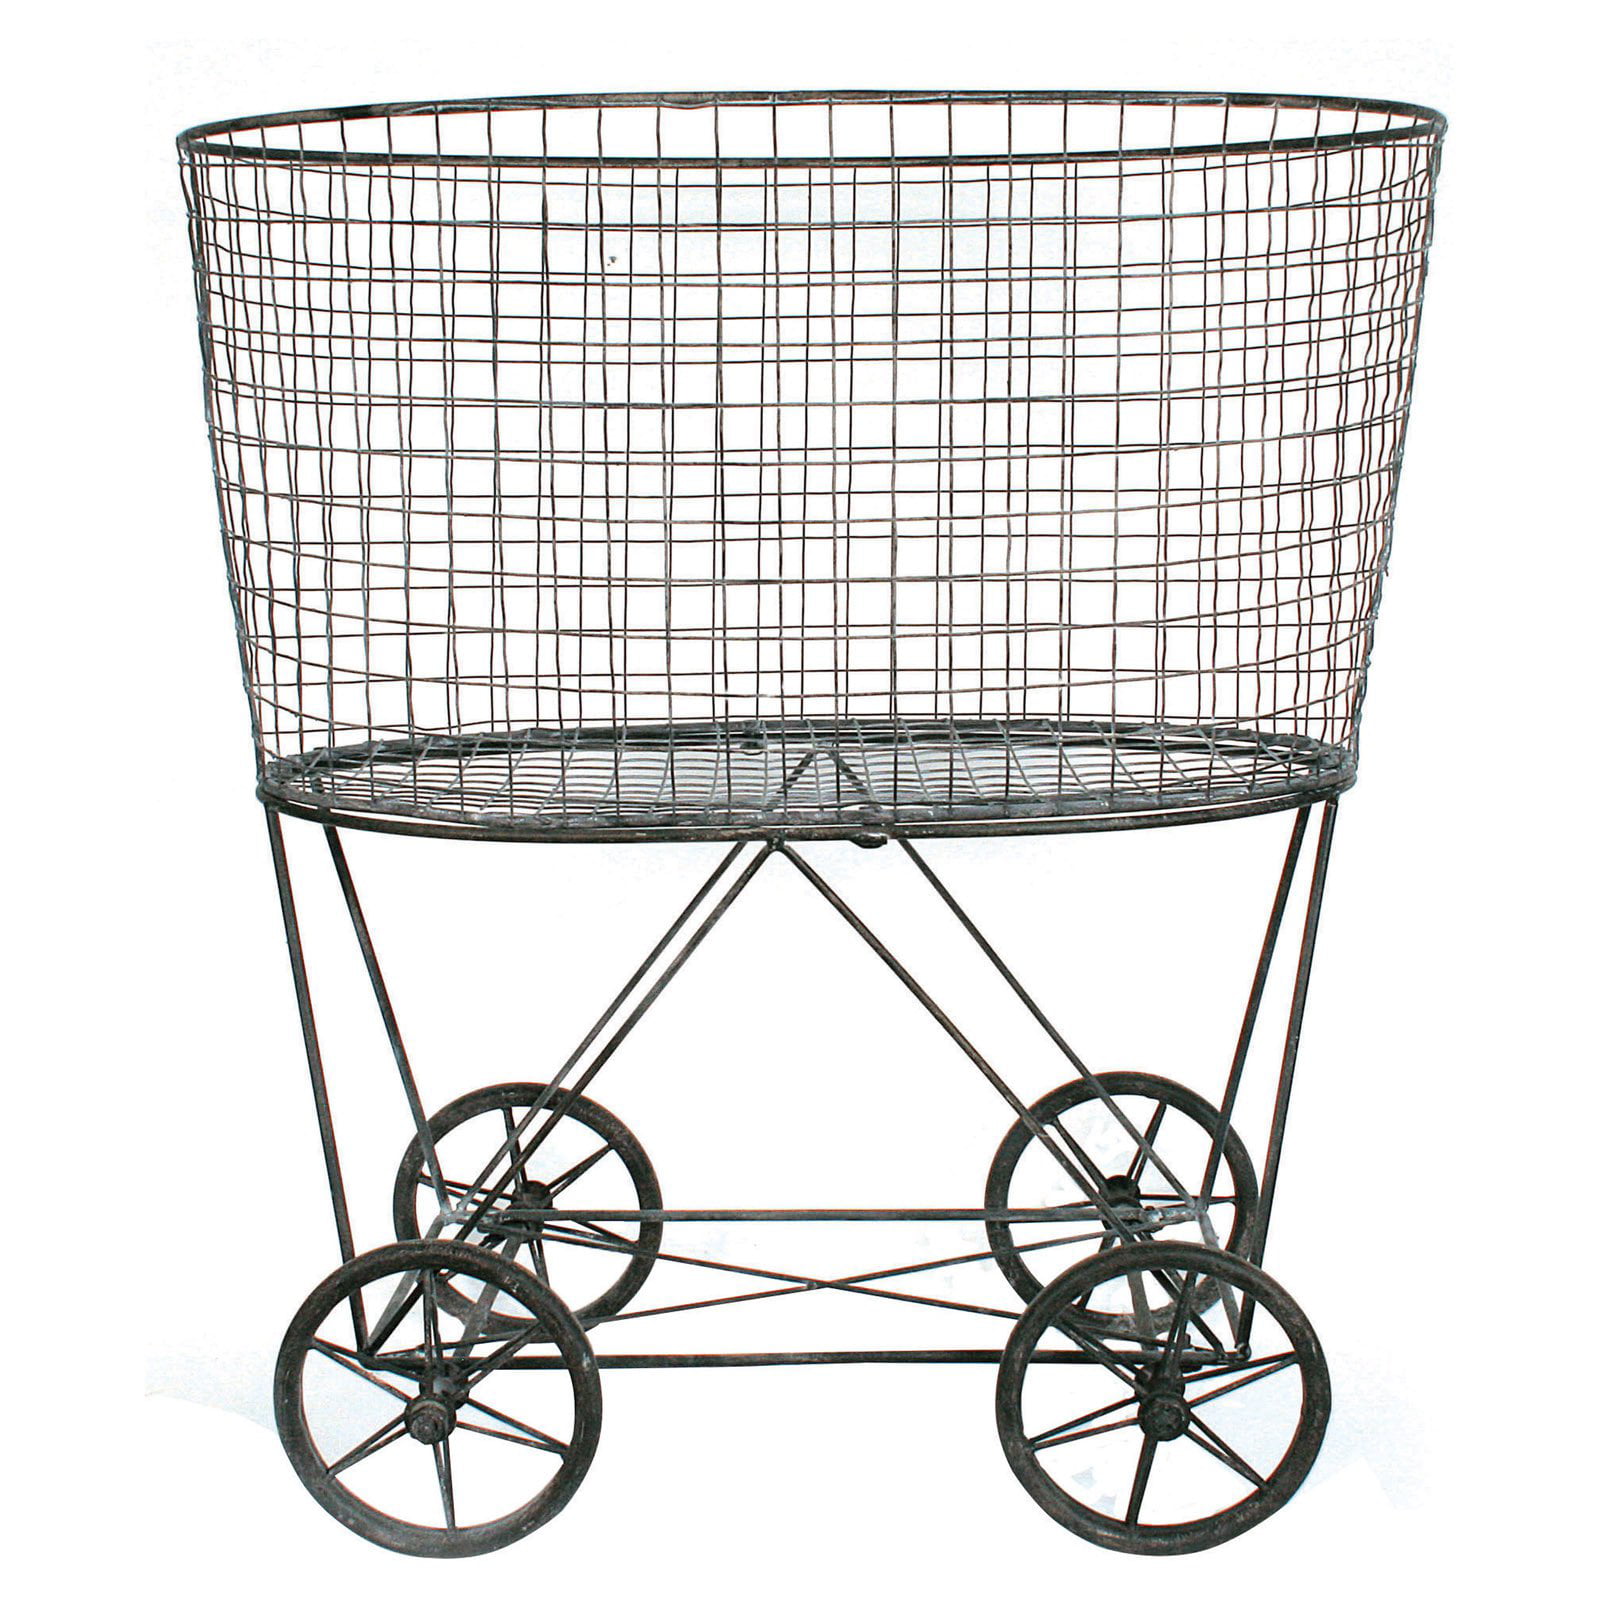 cloth laundry basket with wheels